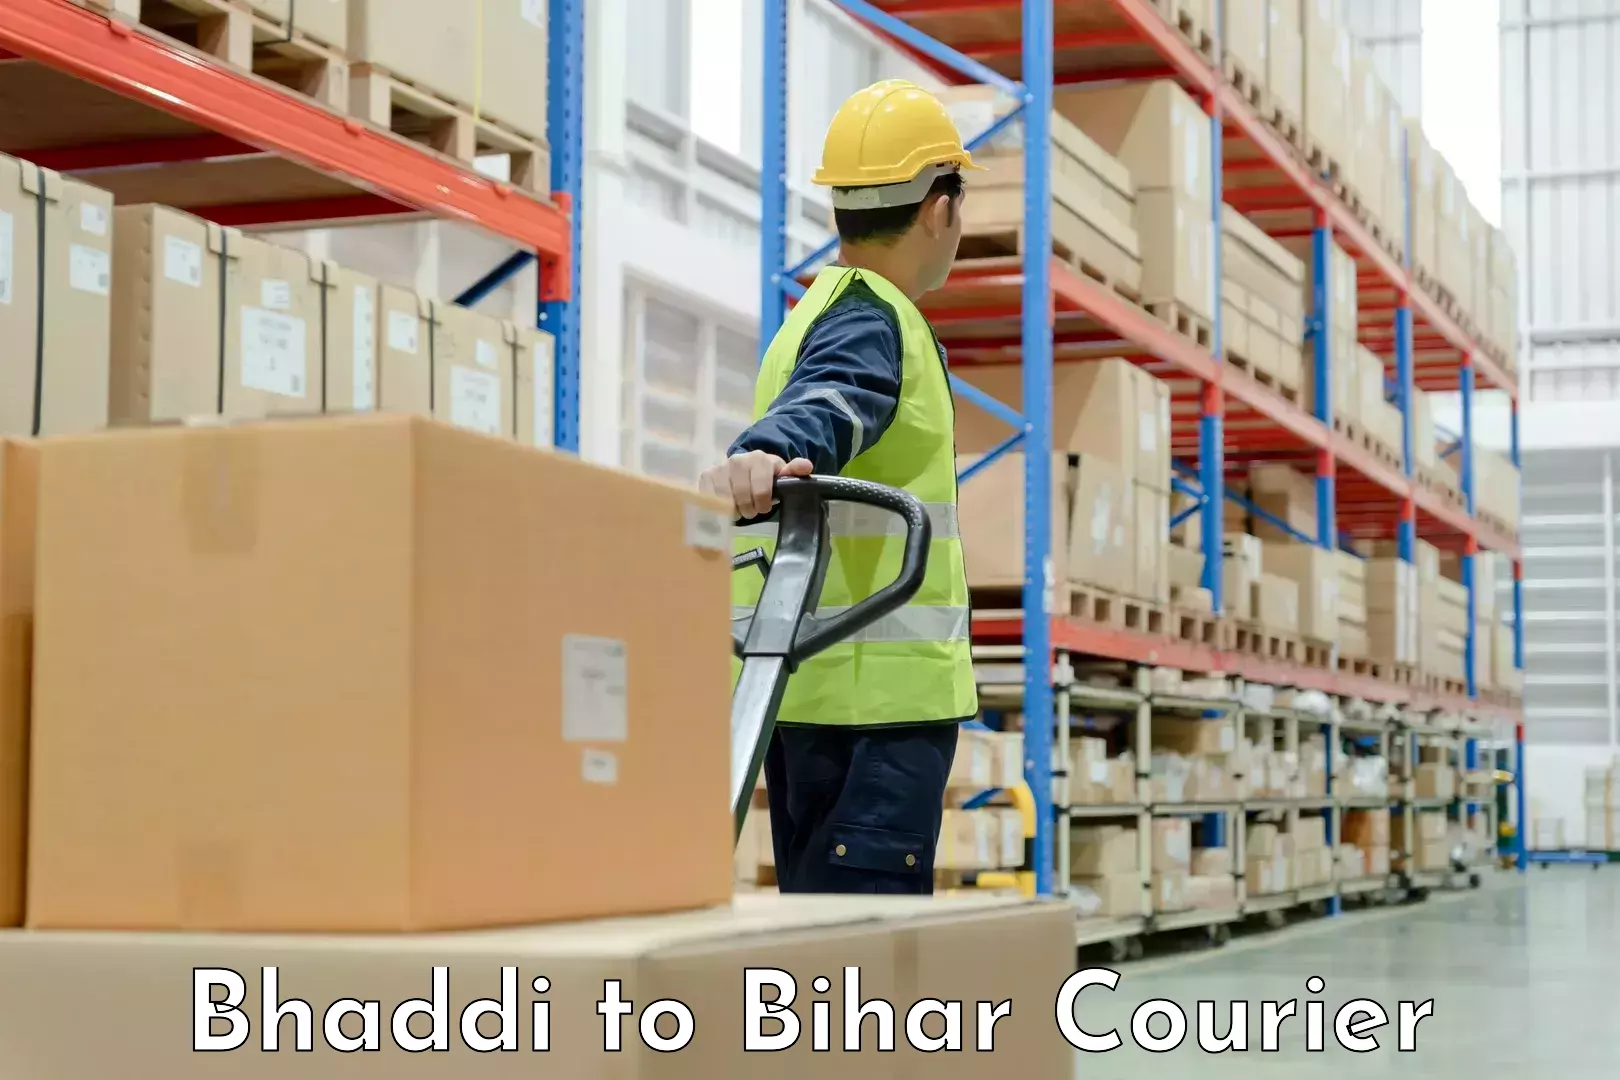 Home moving specialists Bhaddi to Bihar